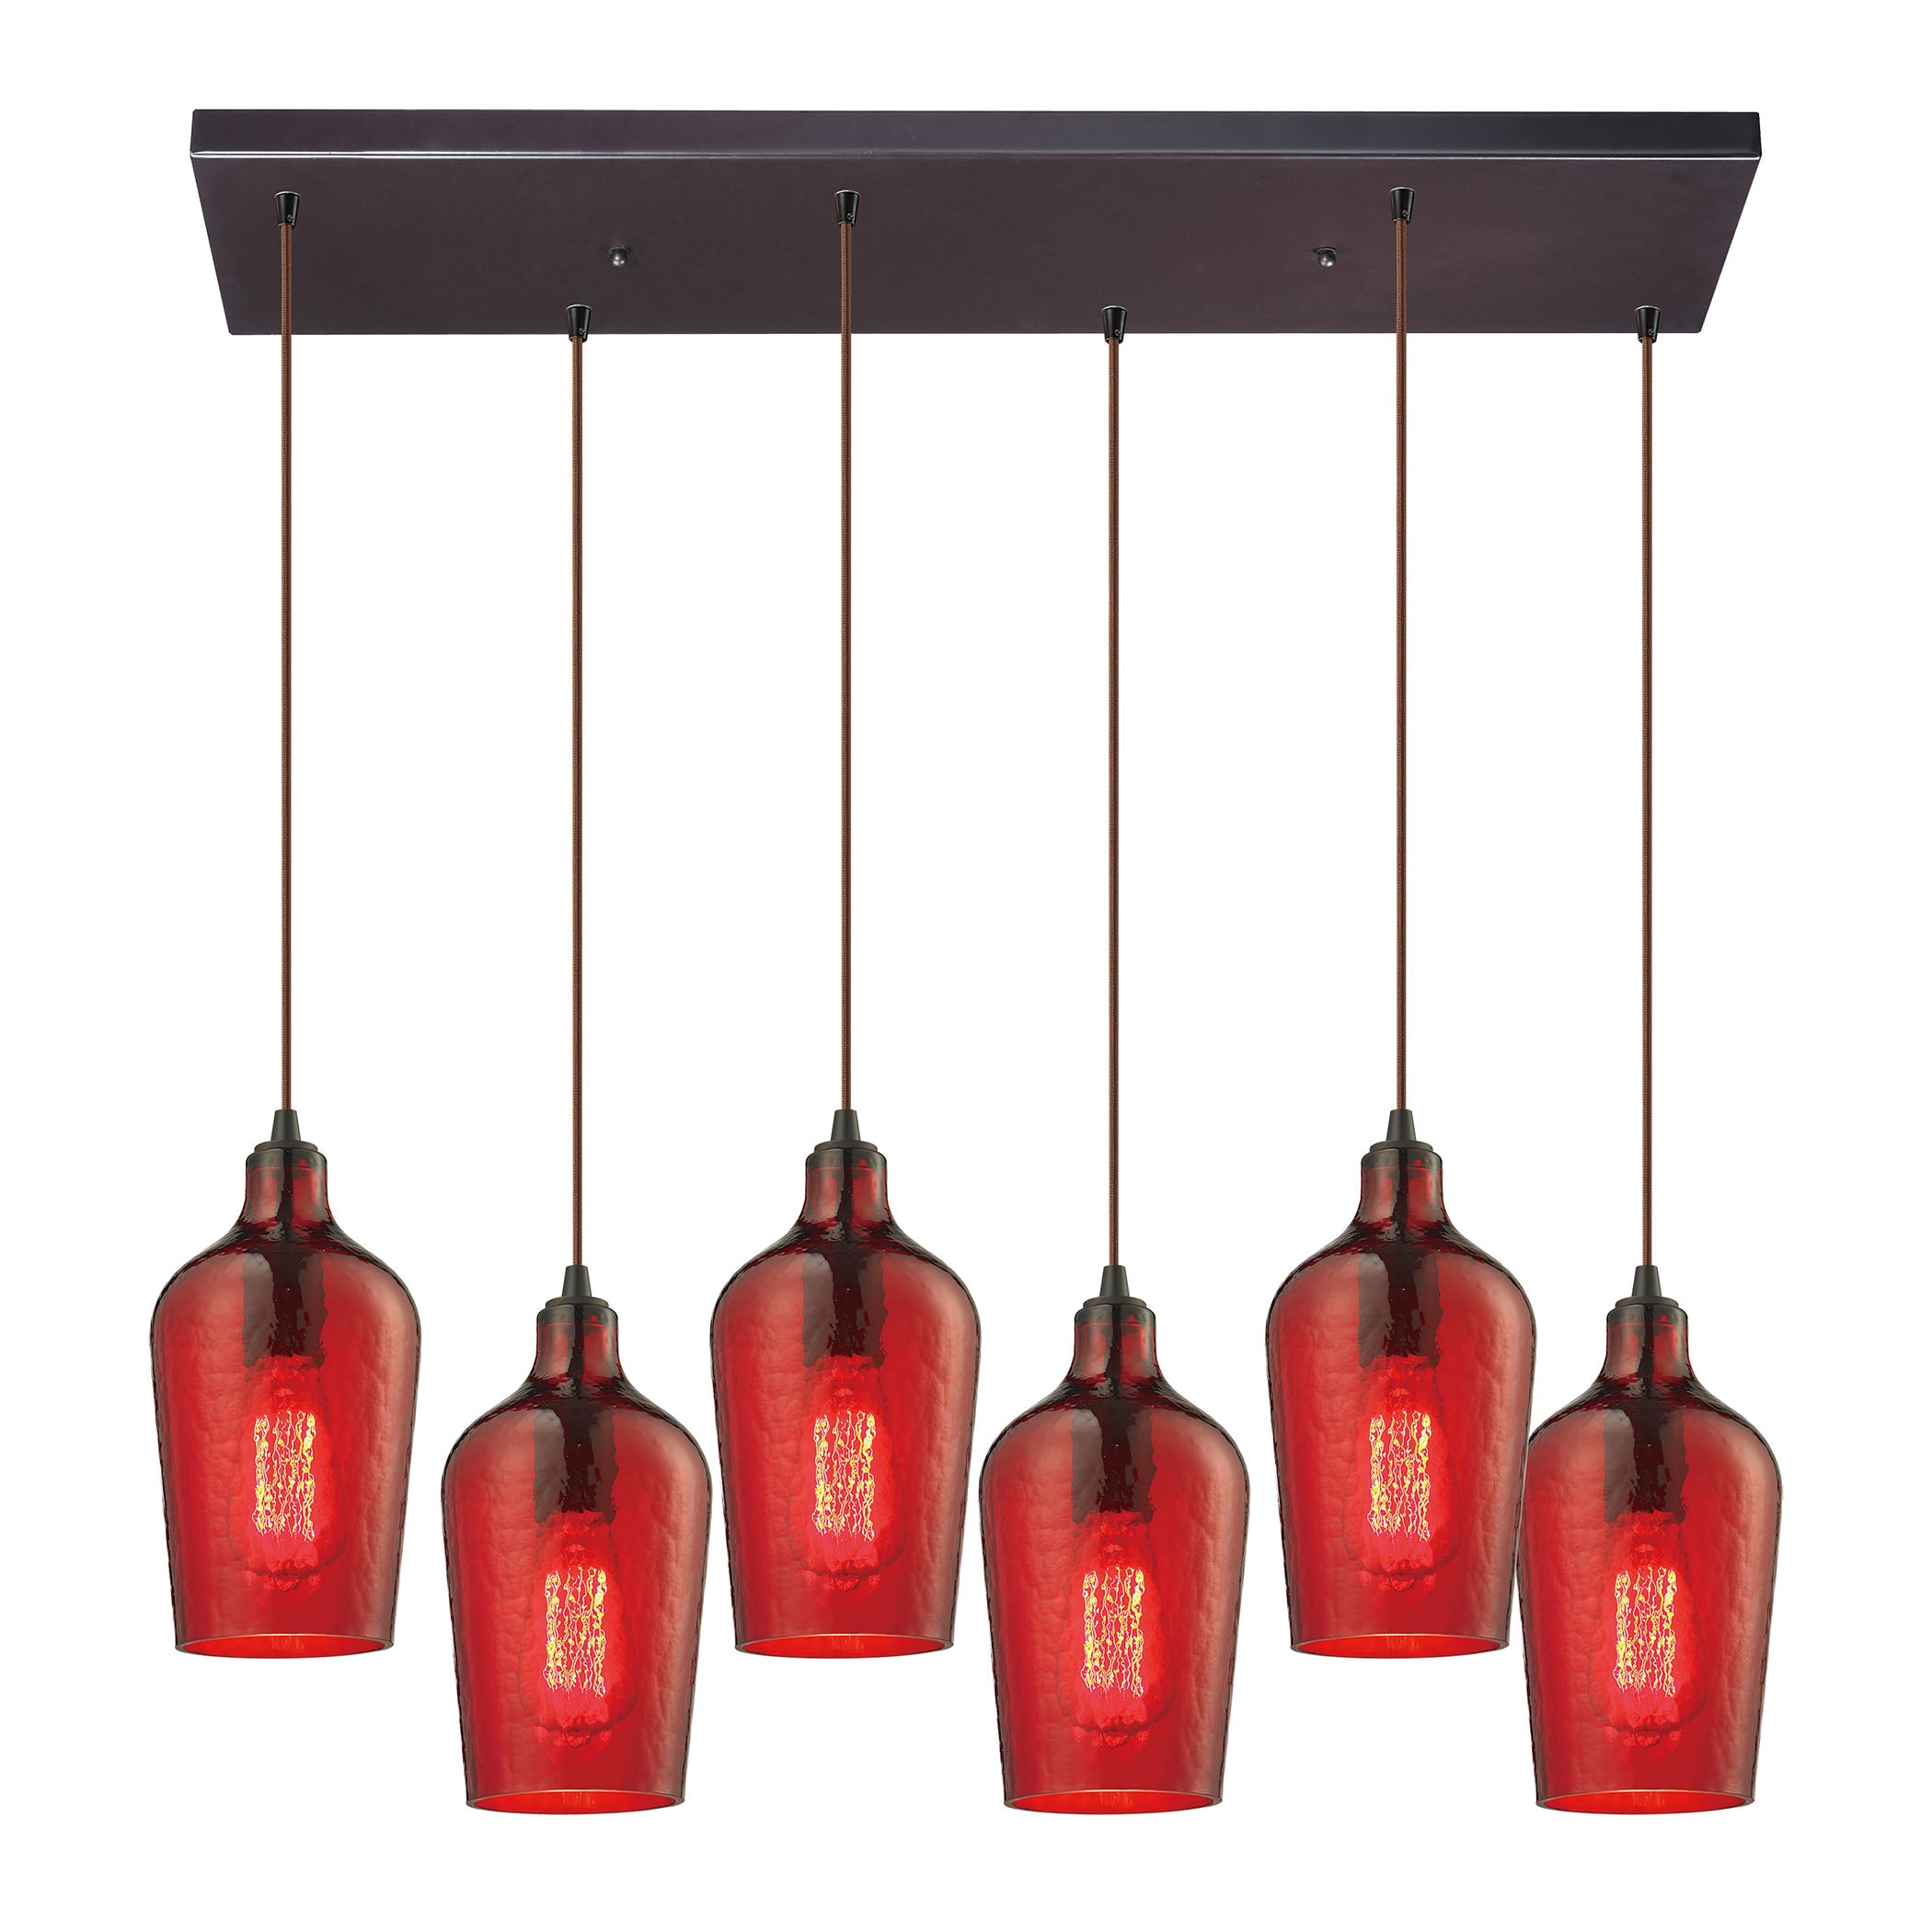 ELK Lighting 10331/6RC-HRD Hammered Glass 6-Light Rectangular Pendant Fixture in Oiled Bronze with Hammered Red Glass